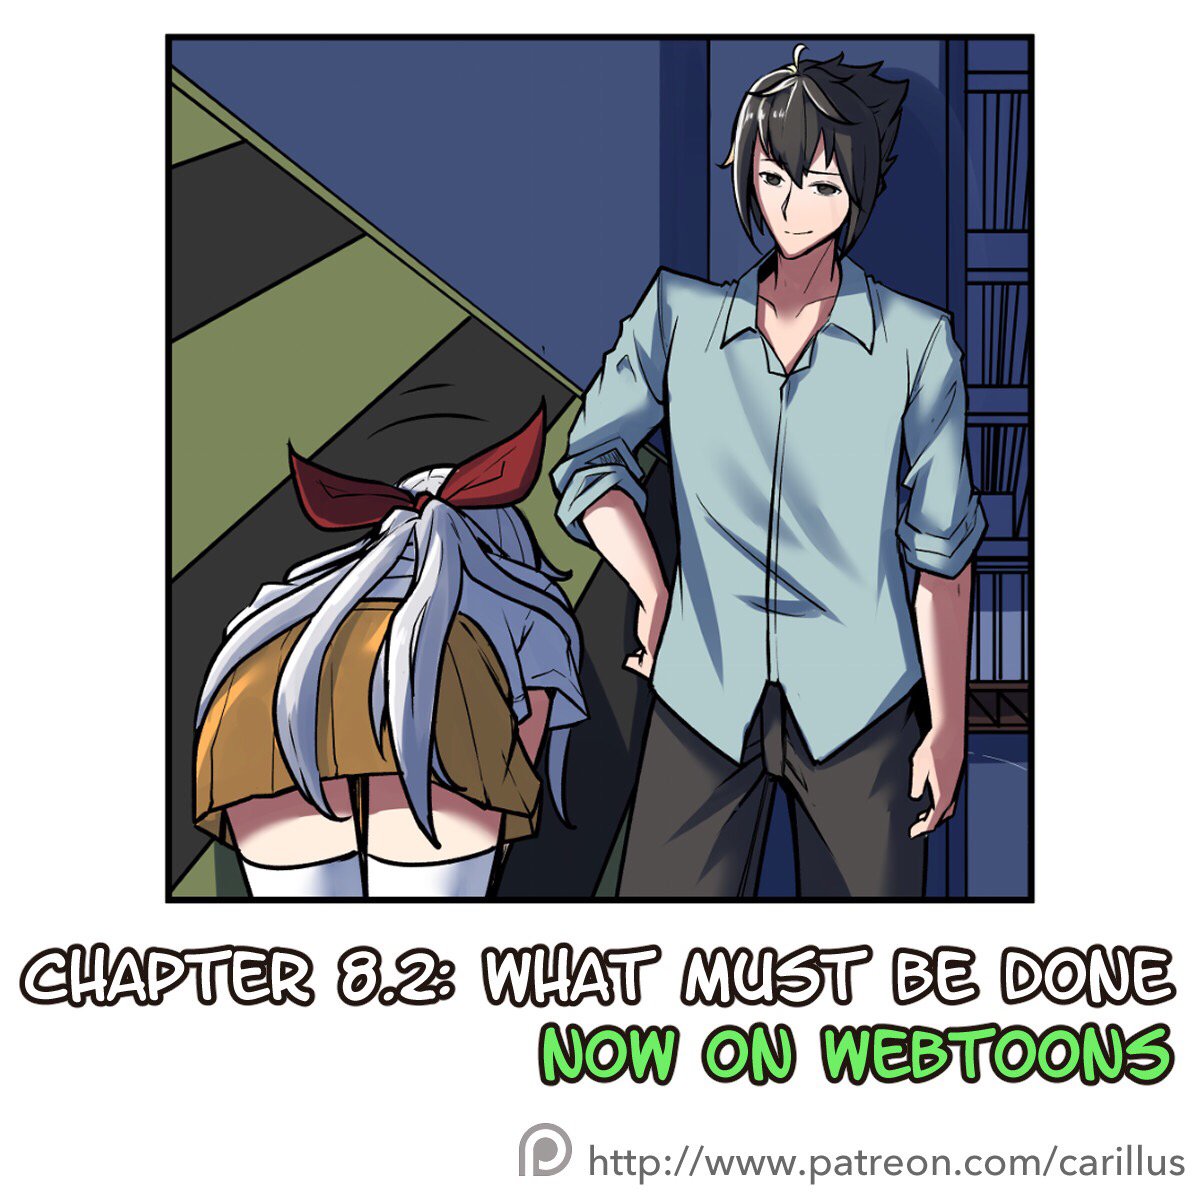 Chapter 8.2 of ExCo now on LINE Webtoons!

Read it here: https://t.co/Z1opnEO110

#exco_wc #webcomic #webtoons 